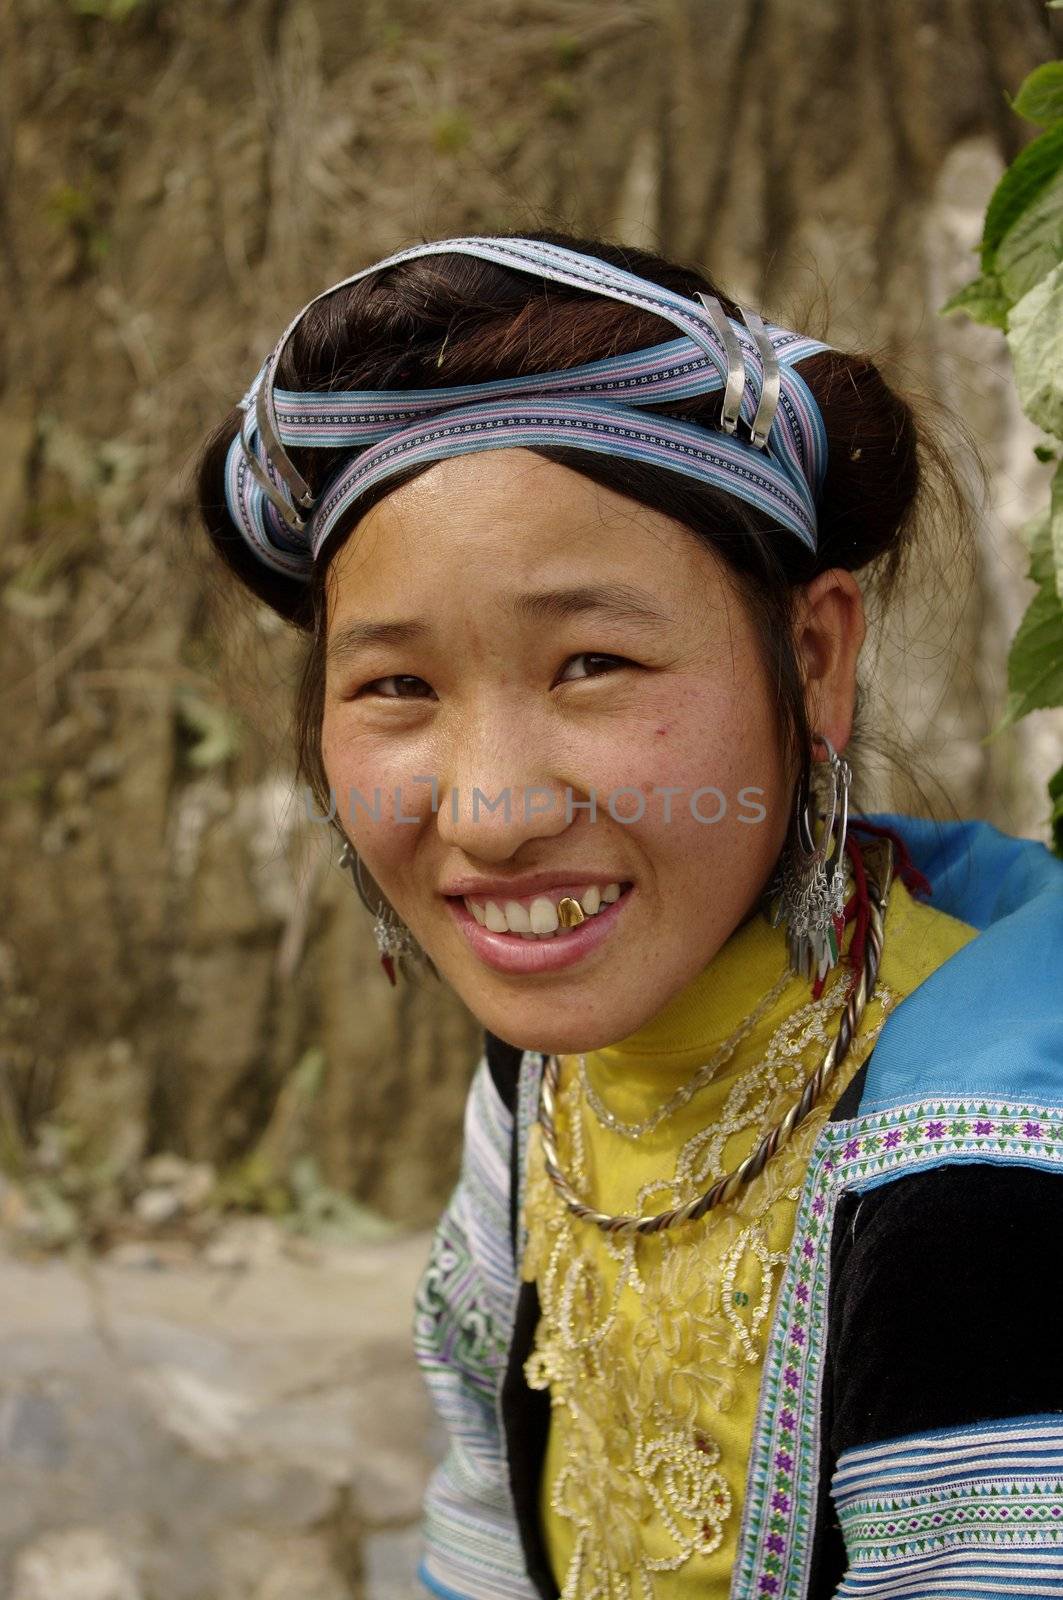 A Hmong woman blue. Her hairstyle is very neat. This ethnic group is not wearing a cap, but women have this hairstyle typical of Hmong blue with blue tape wrapped around the hair of flattened bun held by clamps silver.